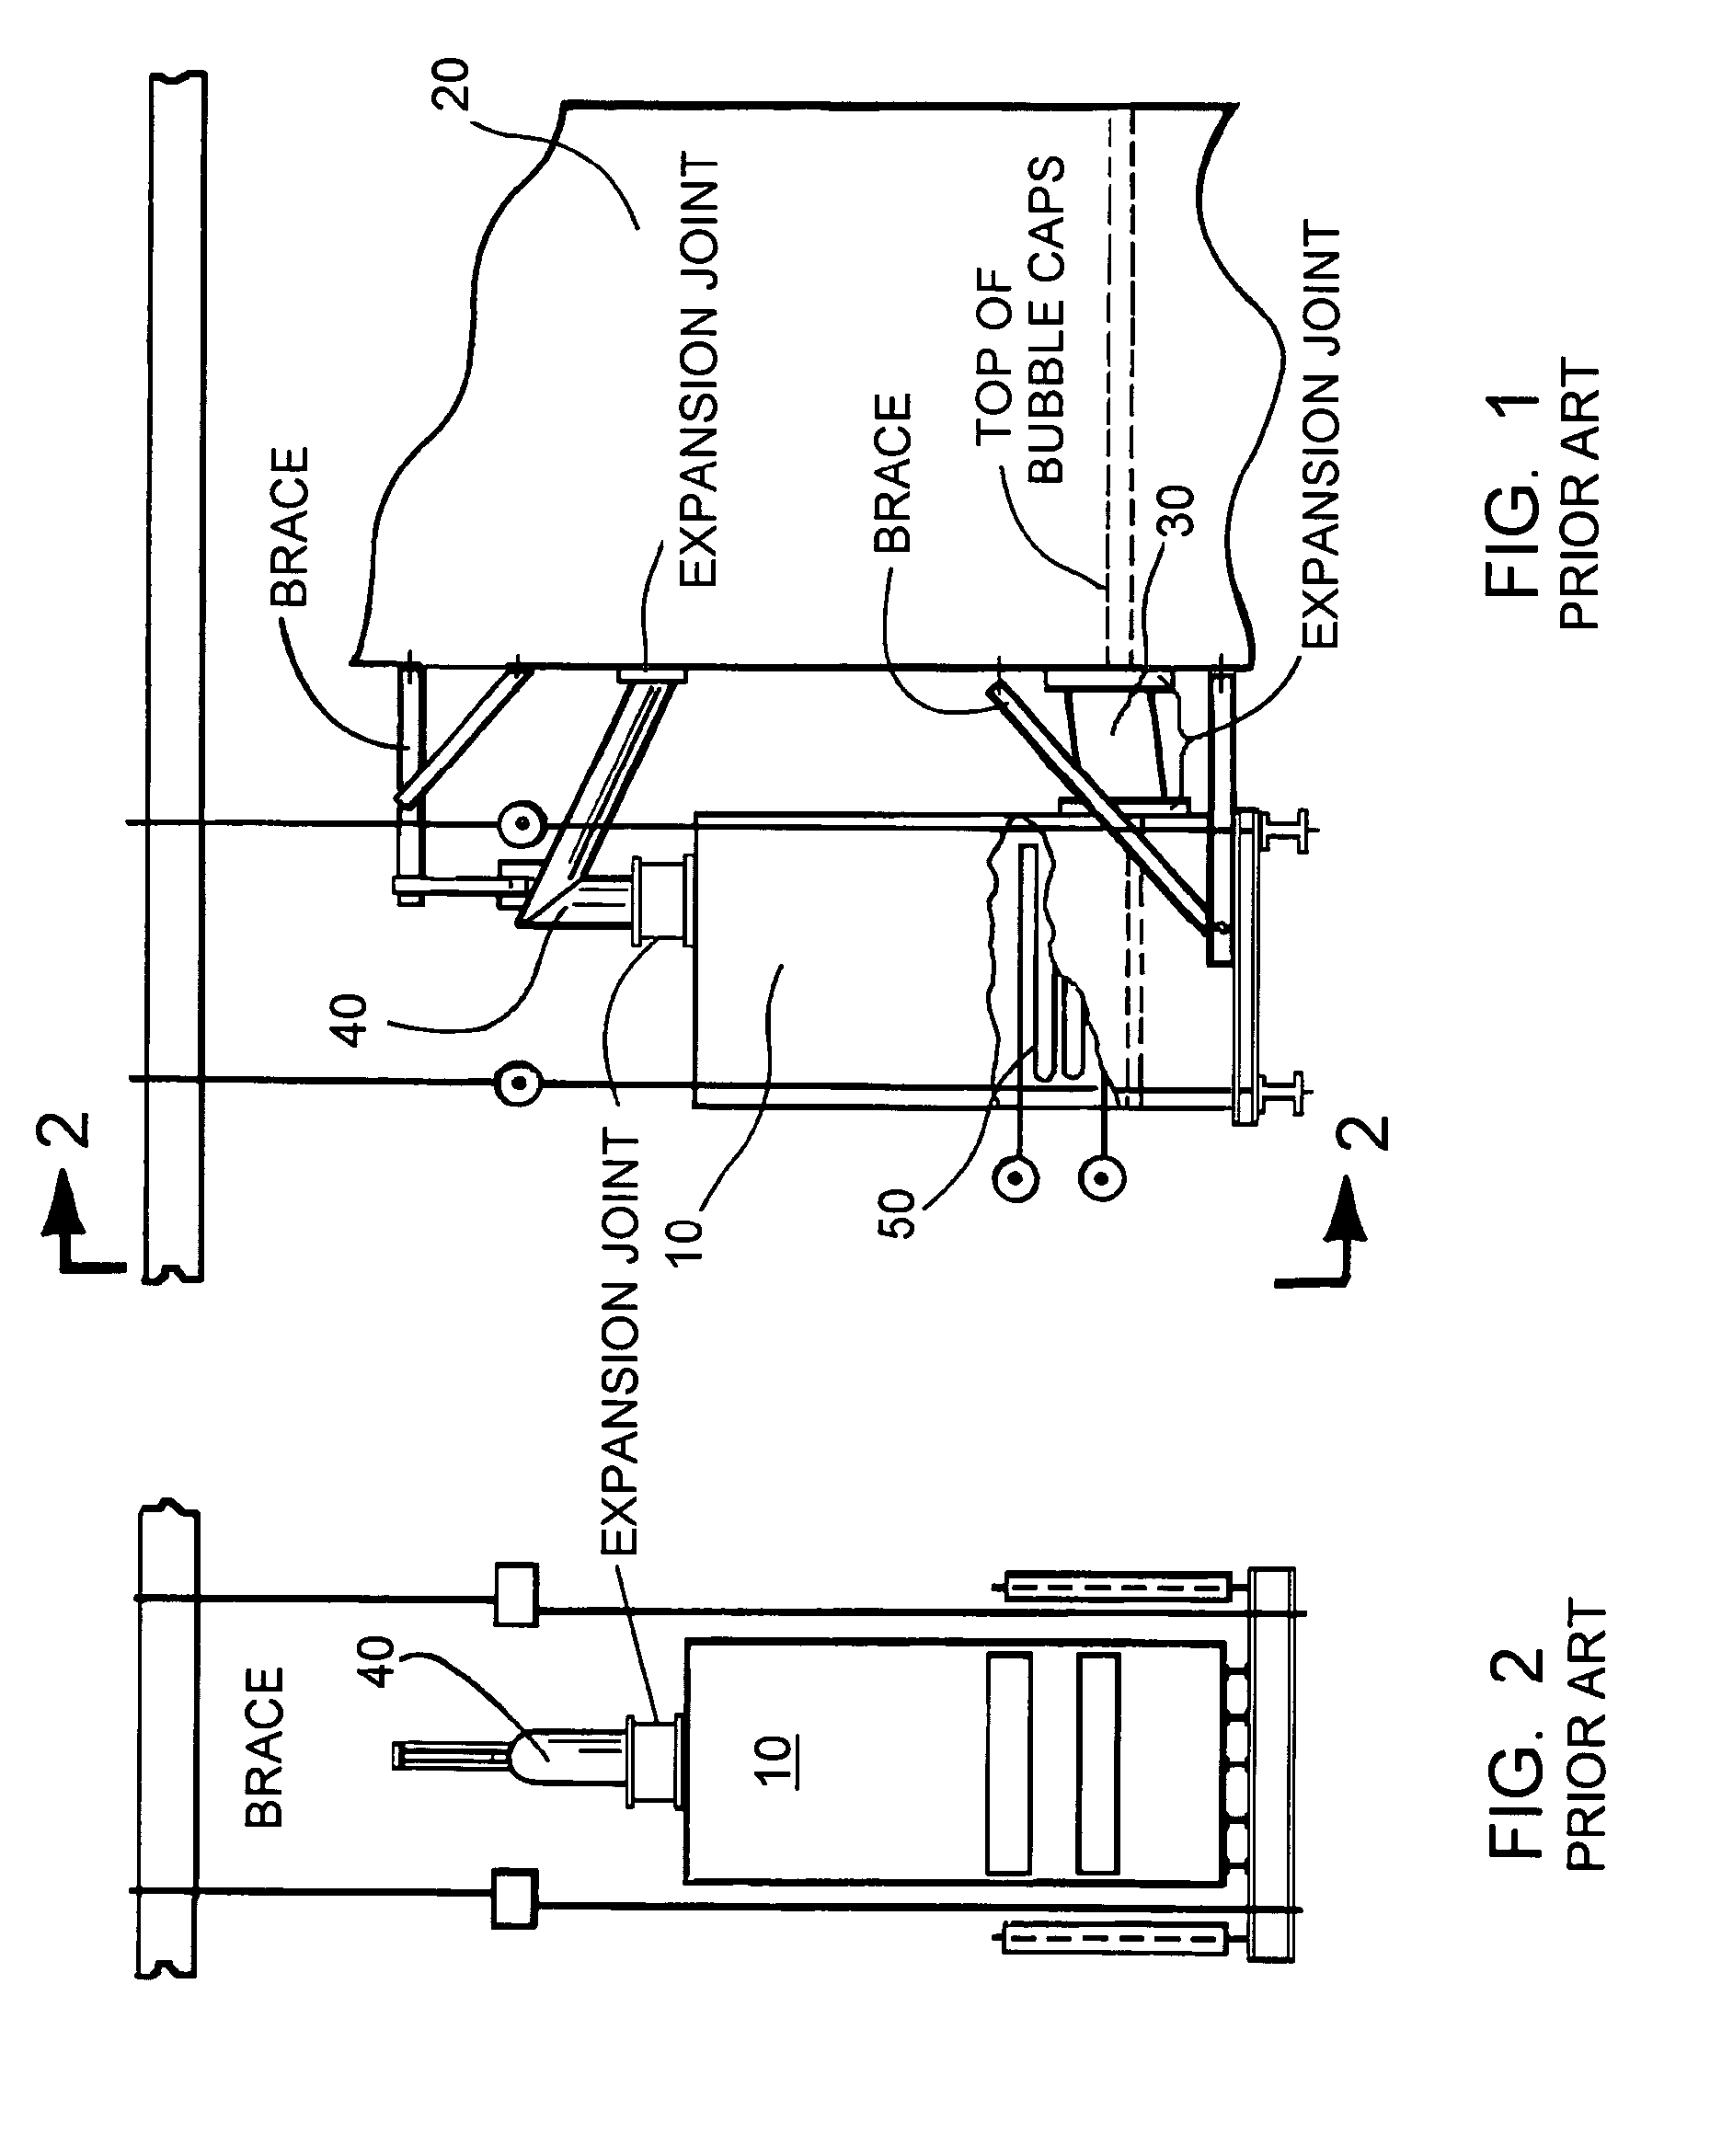 Integrated fluidized bed ash cooler